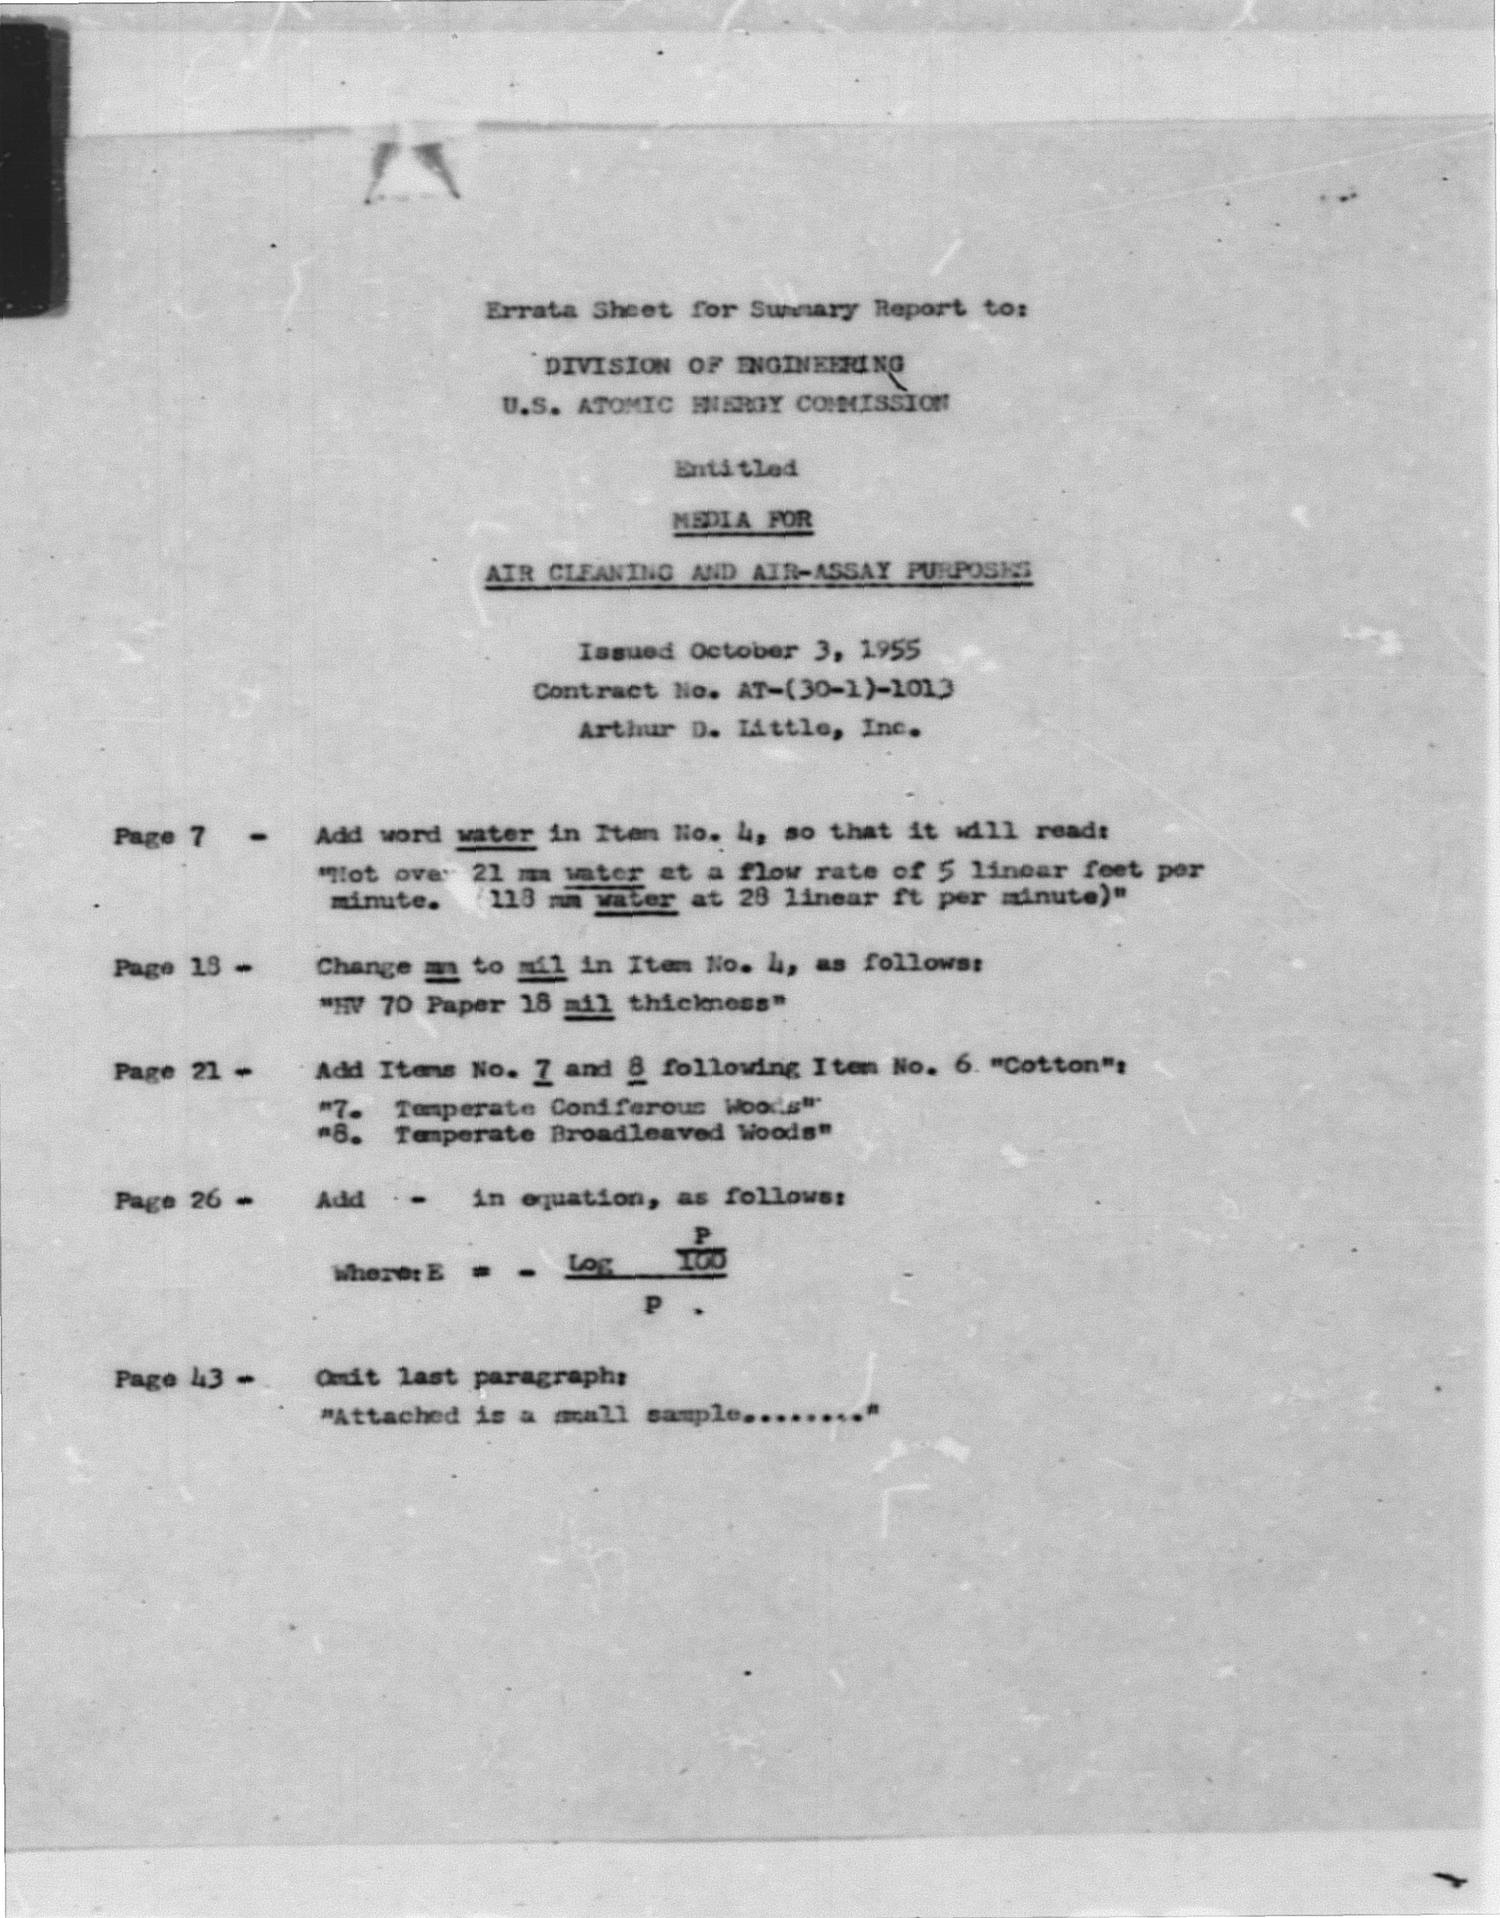 Media for Air Cleaning and Air-Assay Purposes : Final Summary Report for Period Ending December 31, 1954
                                                
                                                    Title Page
                                                